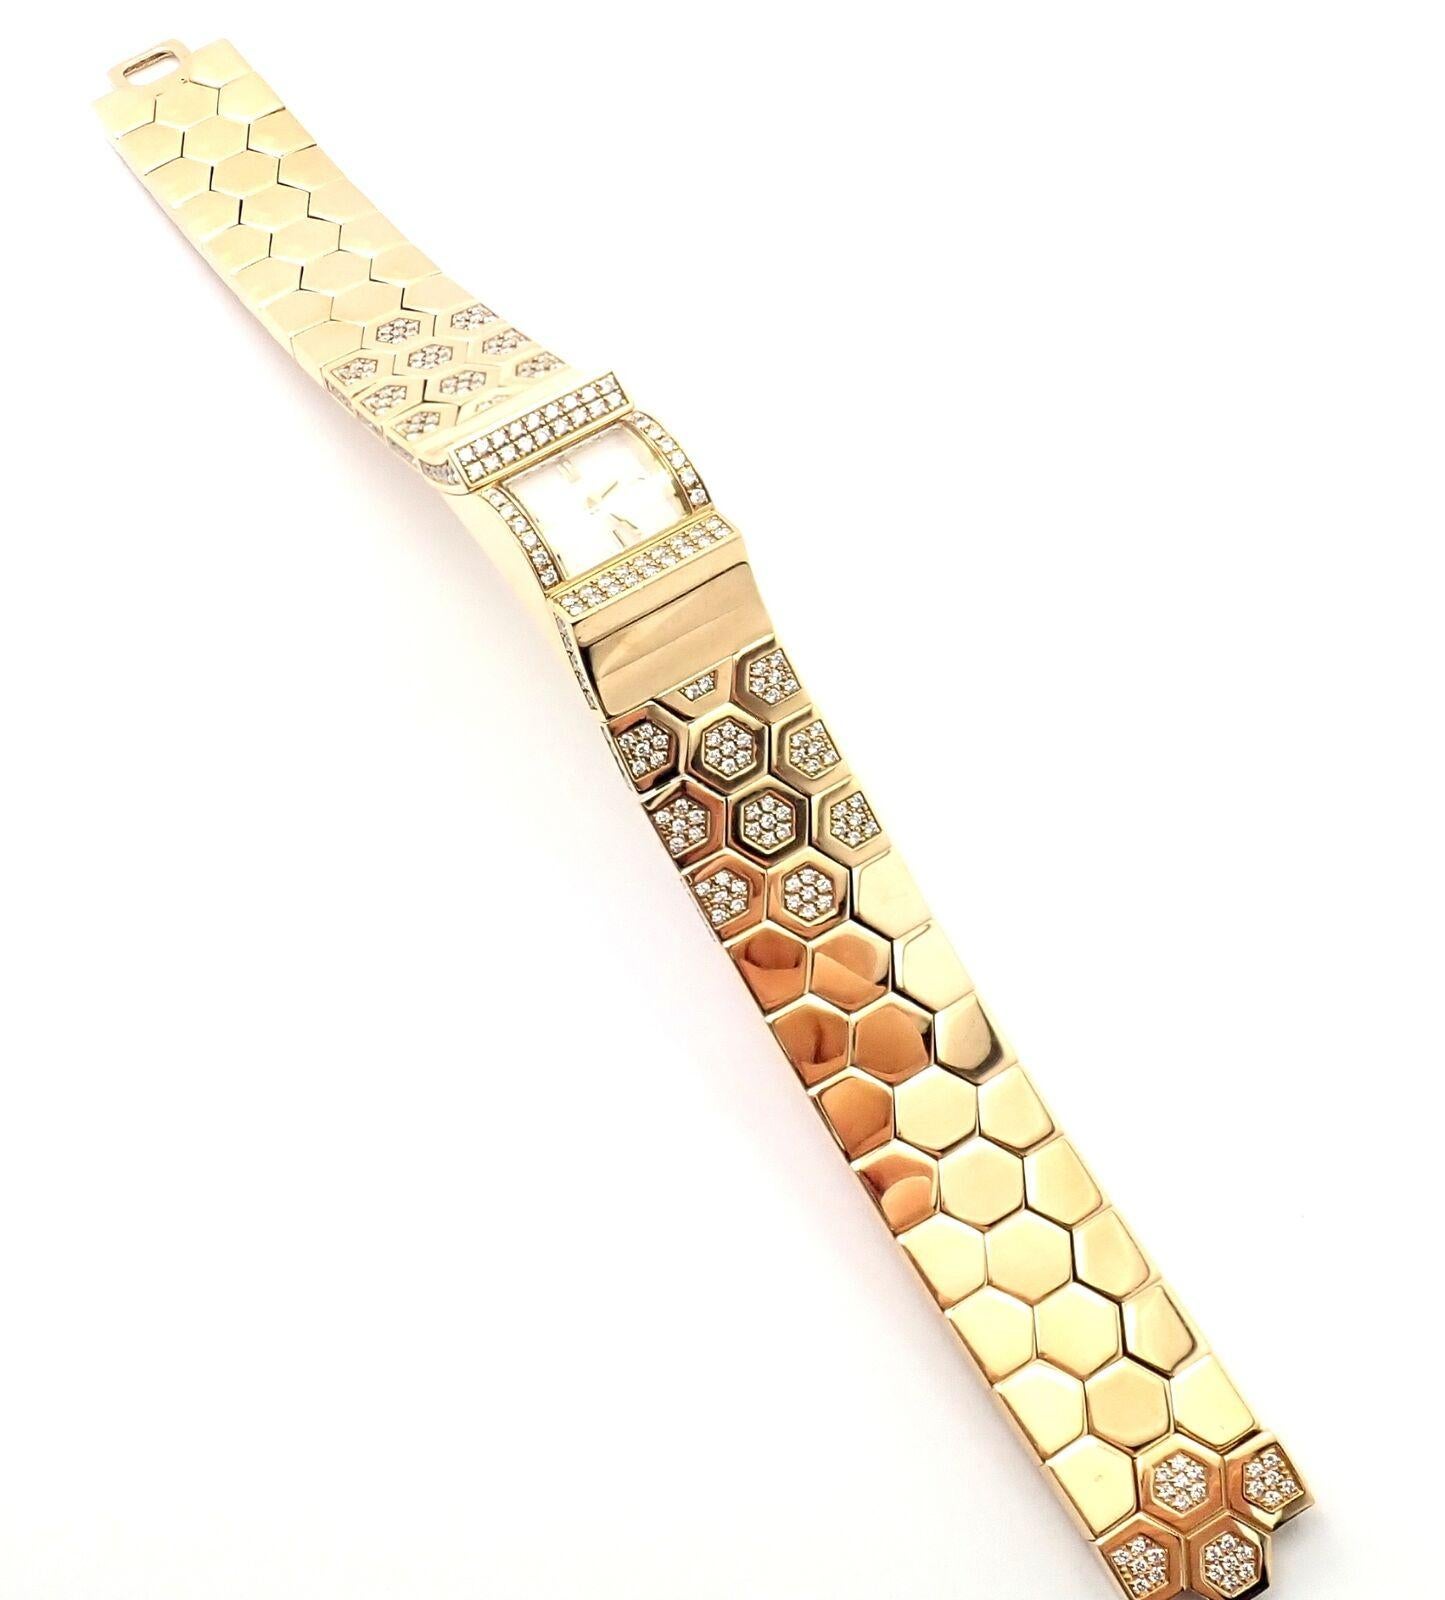 Van Cleef & Arpels Ludo Swann Diamond Yellow Gold Watch In Excellent Condition For Sale In Holland, PA